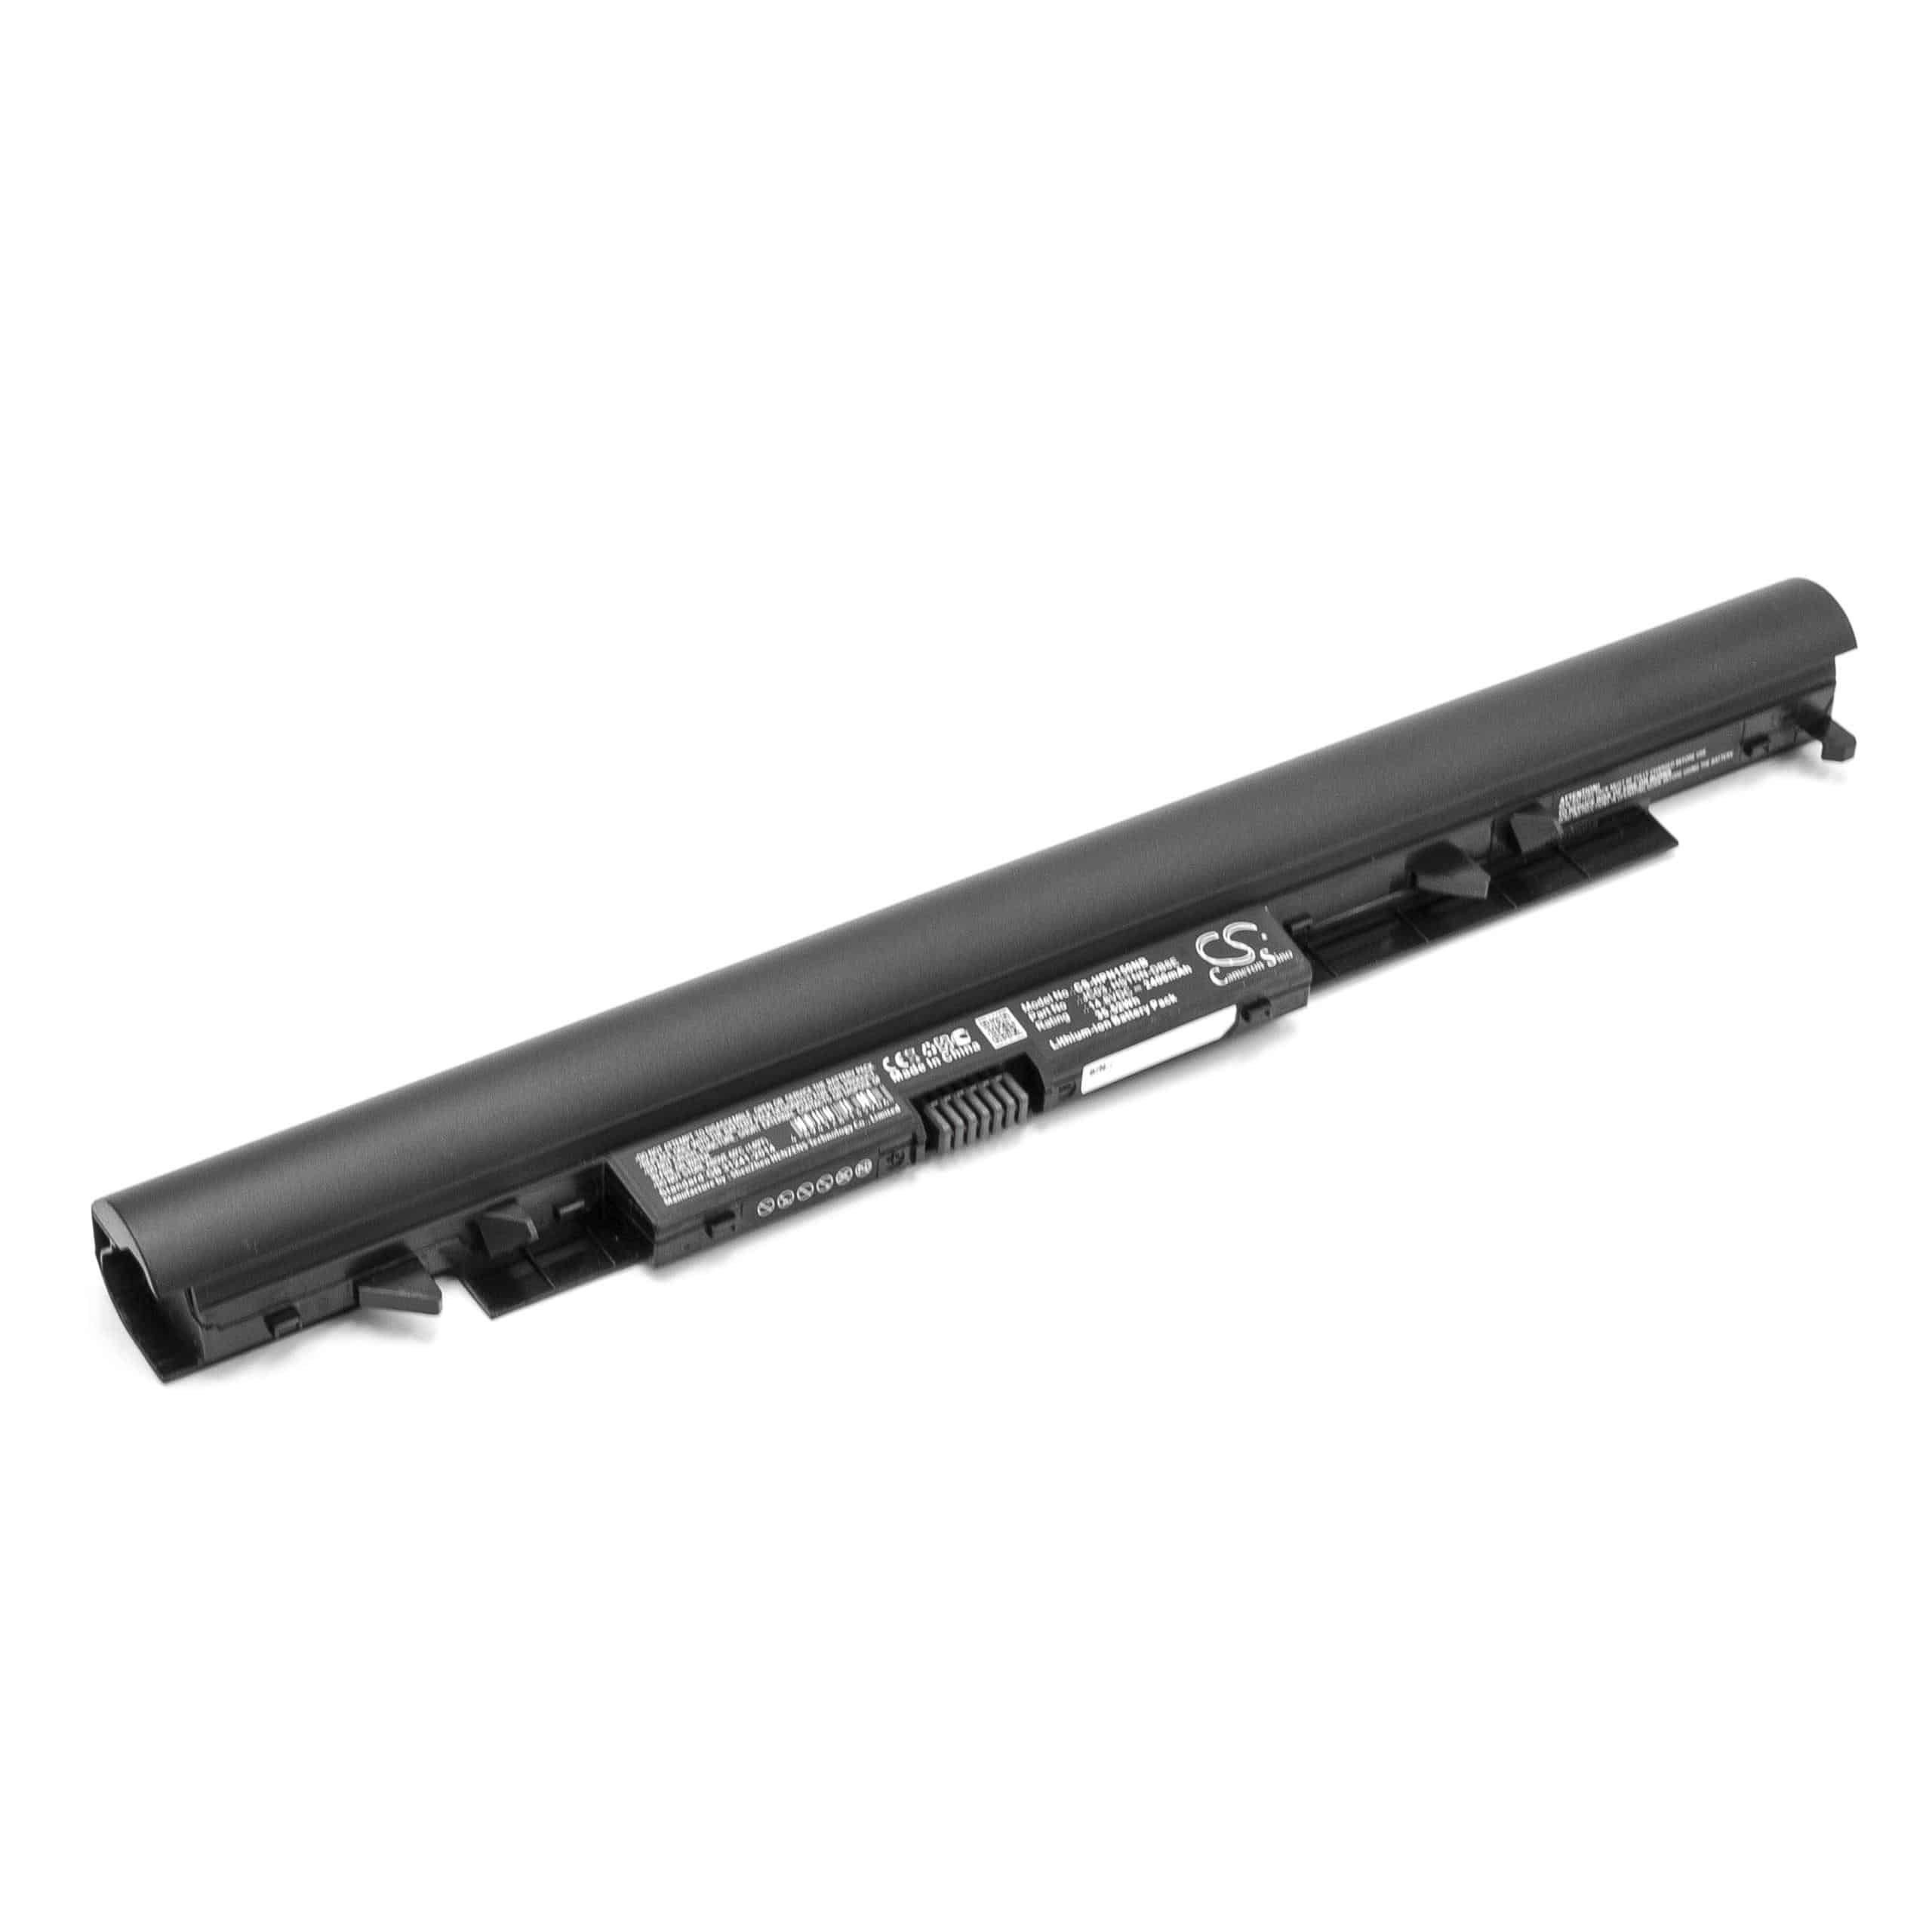 Notebook Battery Replacement for HP 919681-421, 919681-831, 2LP34AA, 919681-221 - 2400mAh 14.8V Li-Ion, black